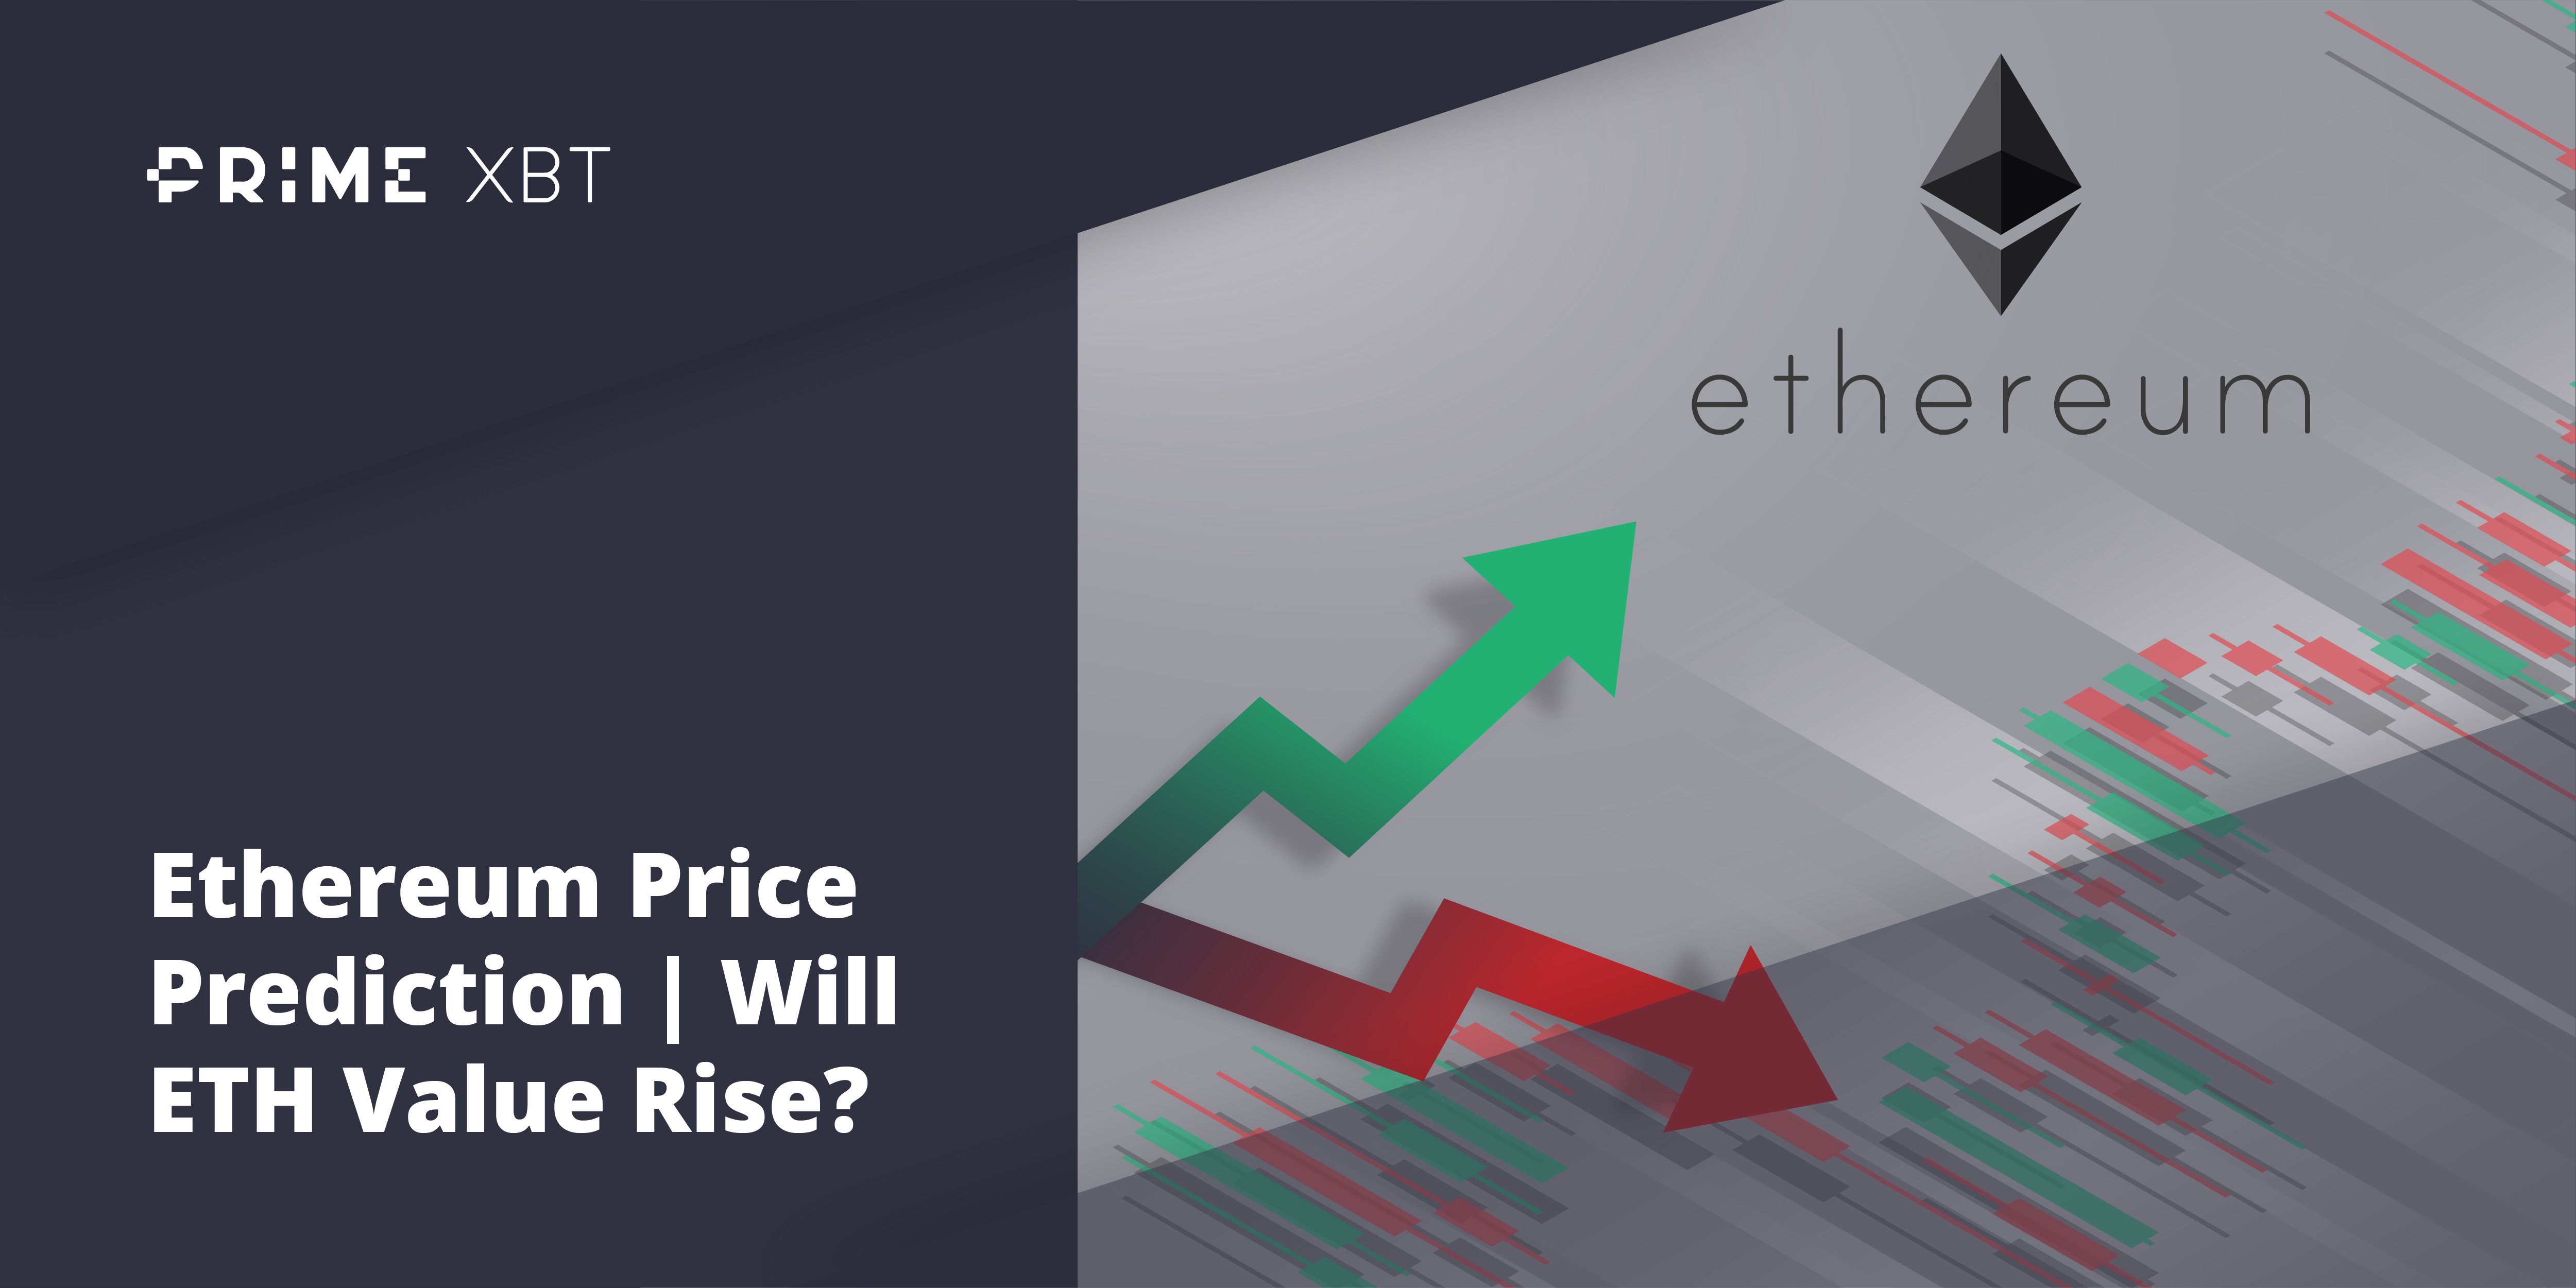 Ethereum Price 2021 - Ethereum Price Prediction What Would Be The Price Of Ethereum By The End Of 2021 / Almost all ethereum price predictions 2021 state that ethereum will keep growing and beat the current ath